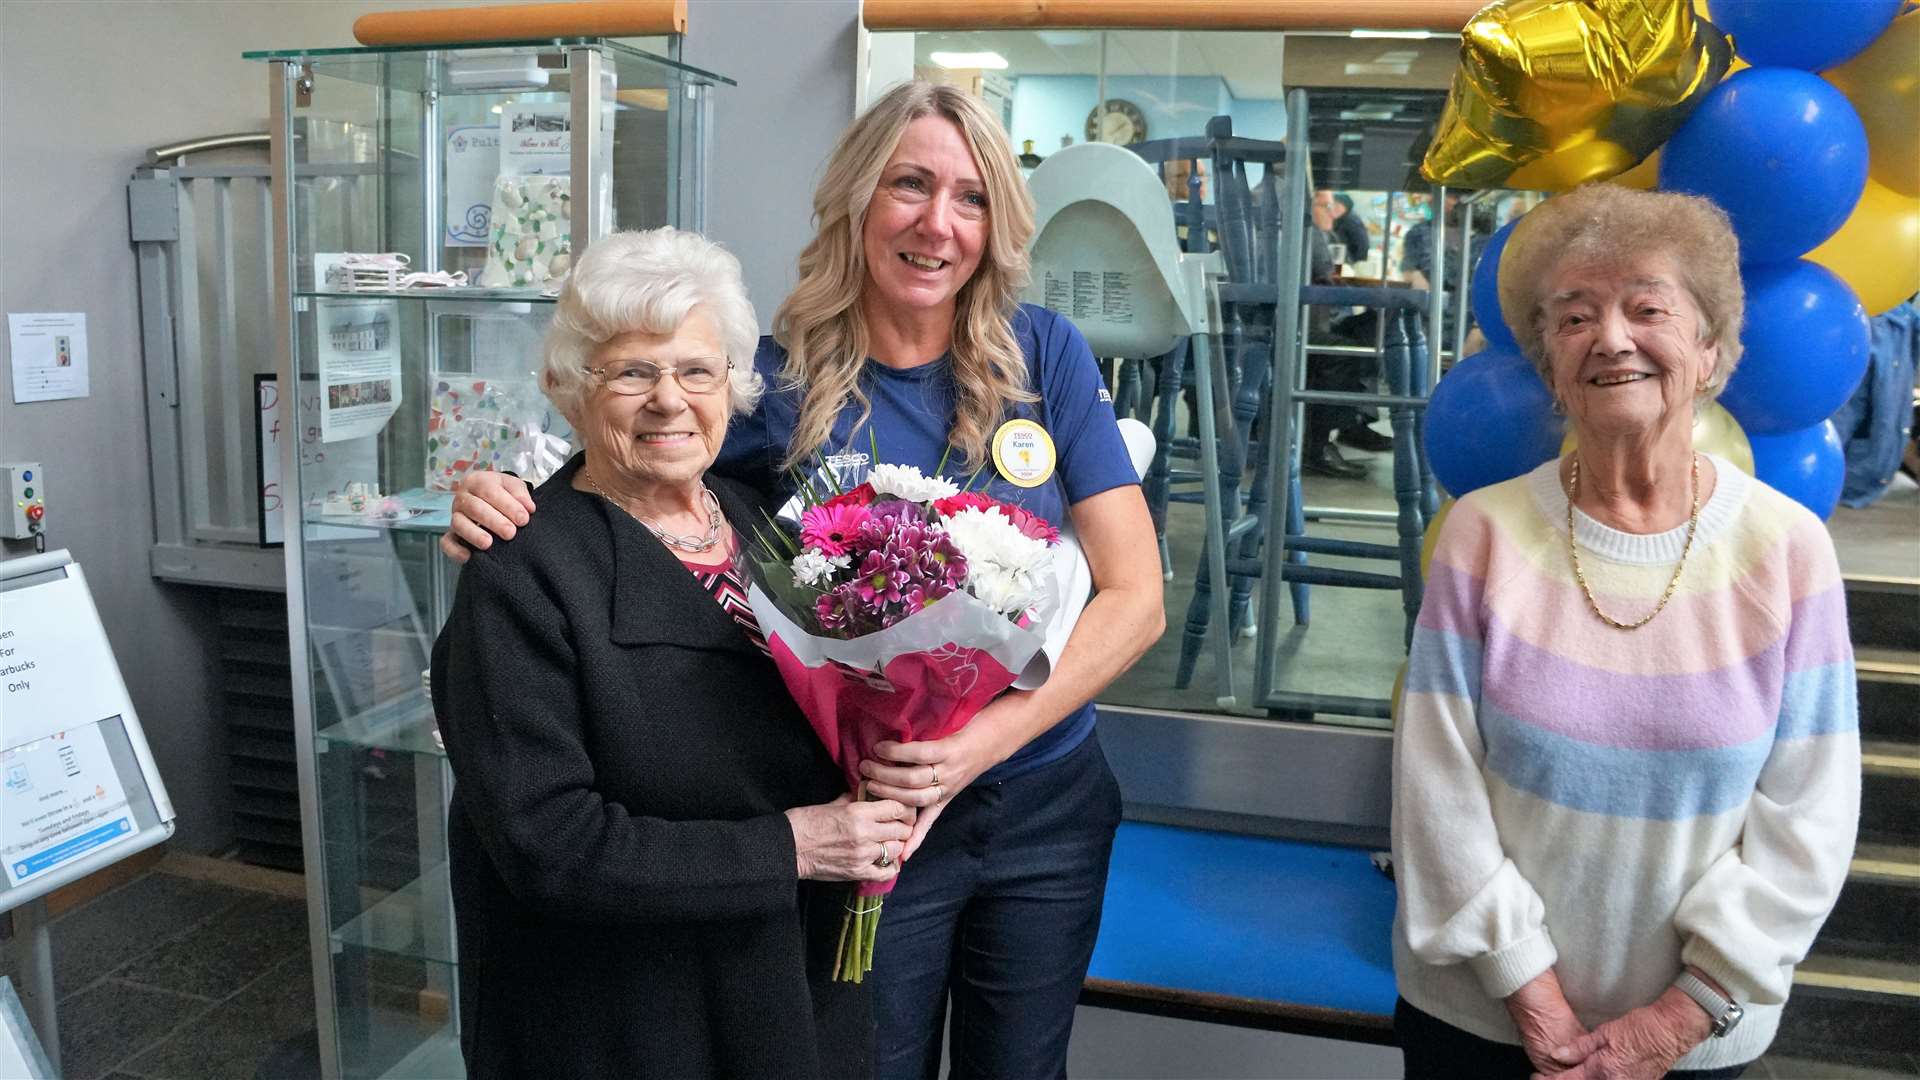 Doreen Bannerman, left, gave flowers to Karen Center on behalf of the lunch club. On the right is Kathleen Sinclair, one of the club's oldest member at age 91. Picture: DGS